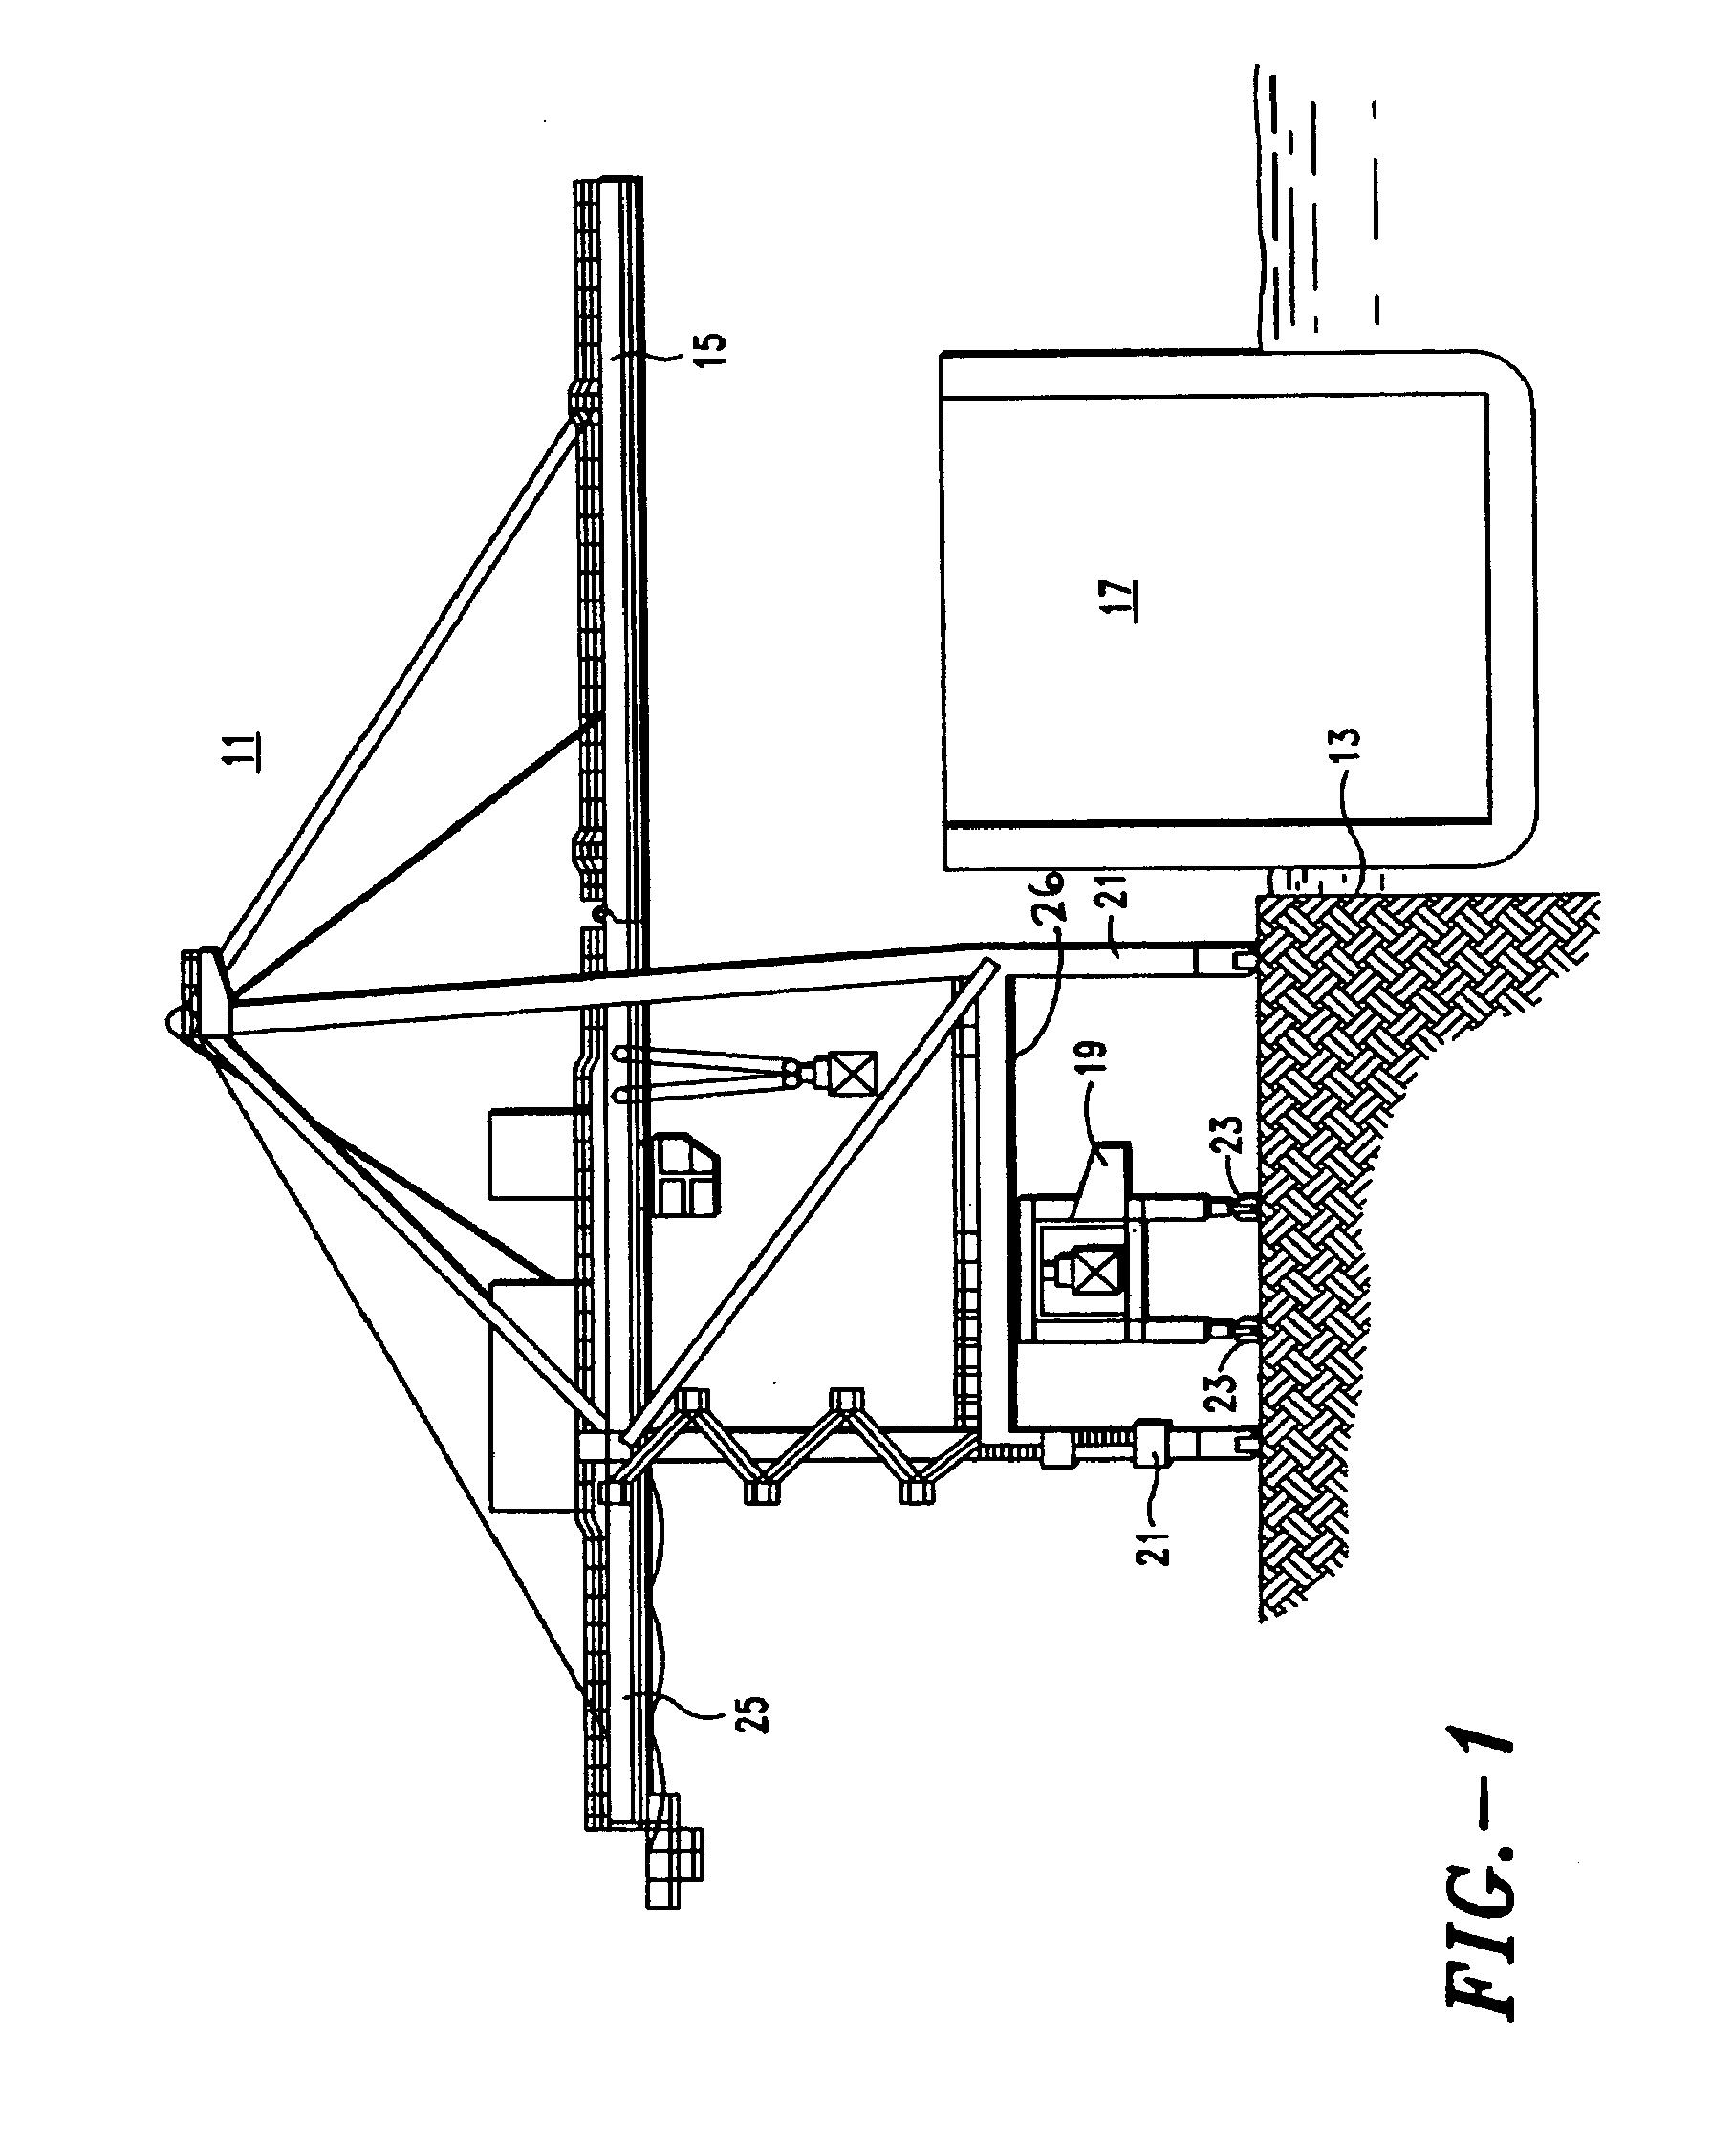 Method of operating a cargo container scanning crane